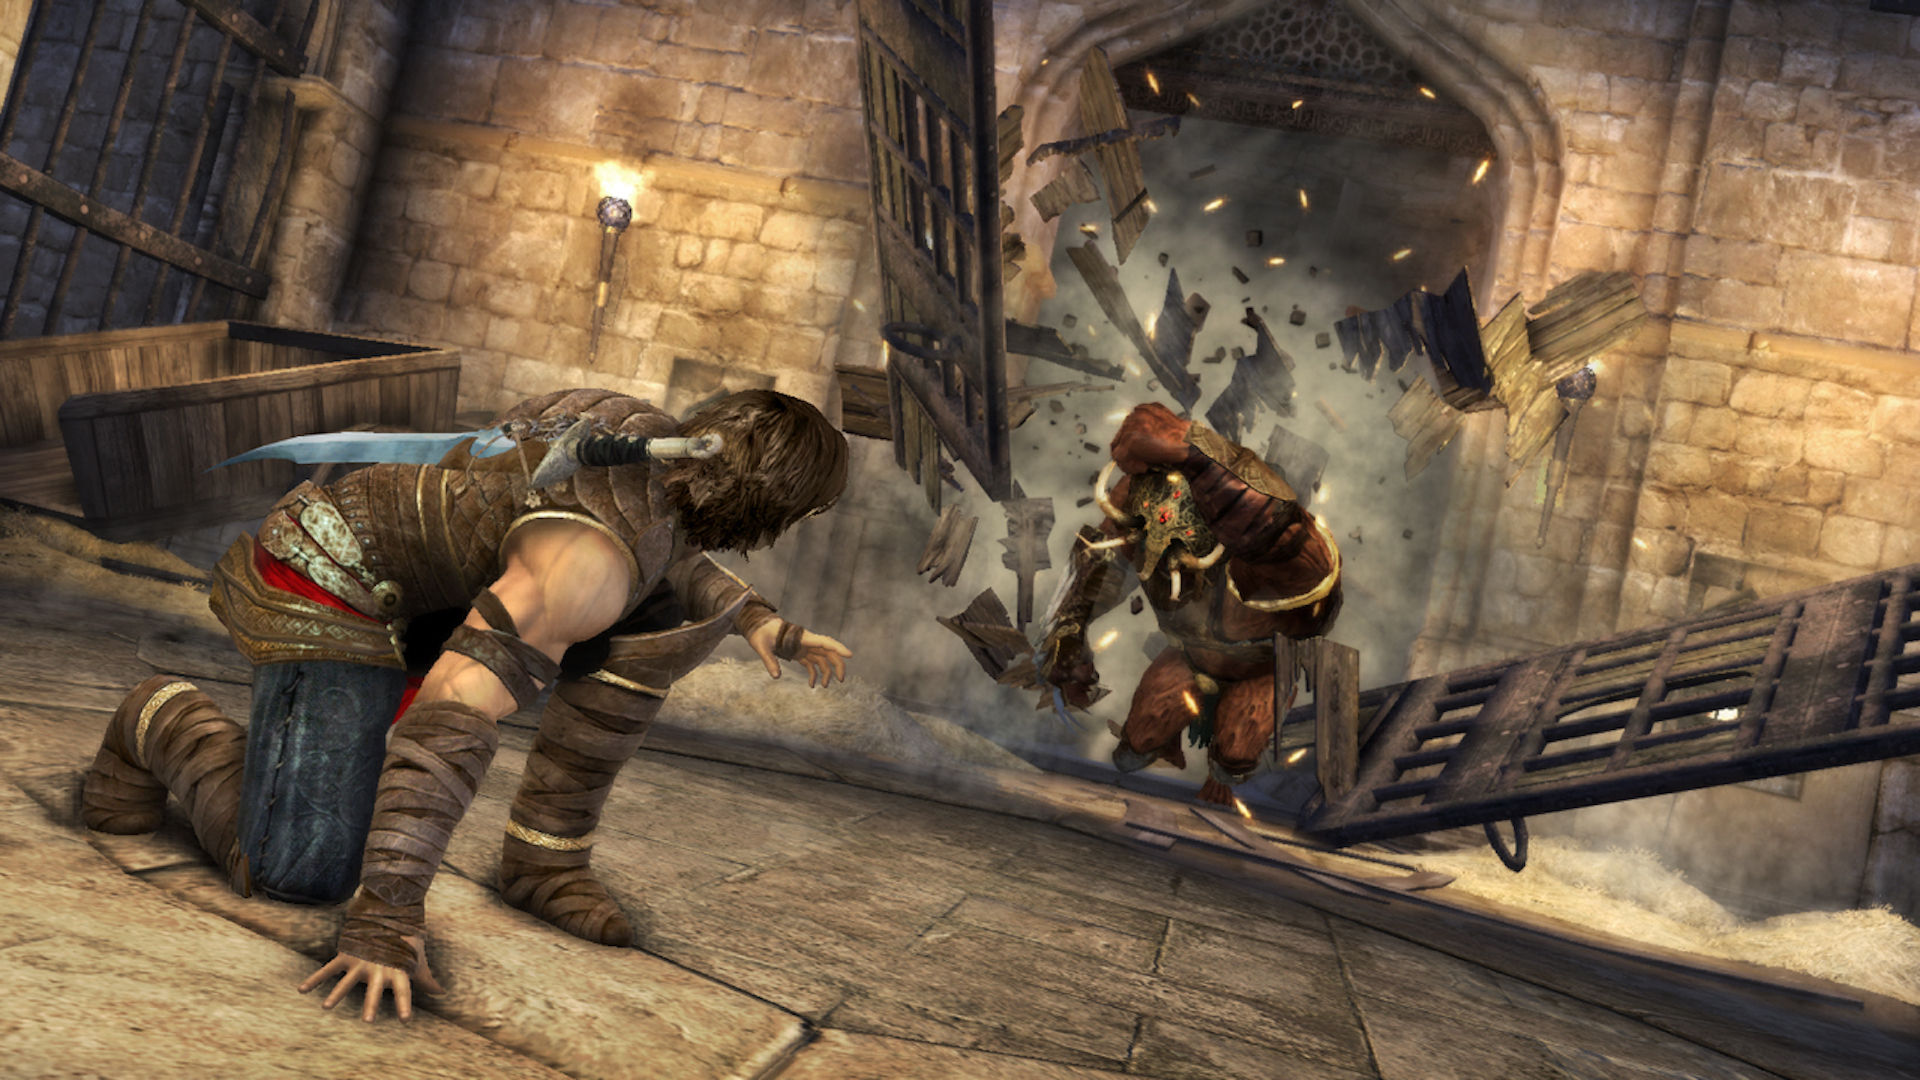 Prince of Persia PS3 games surfacing on PS5 store furthers